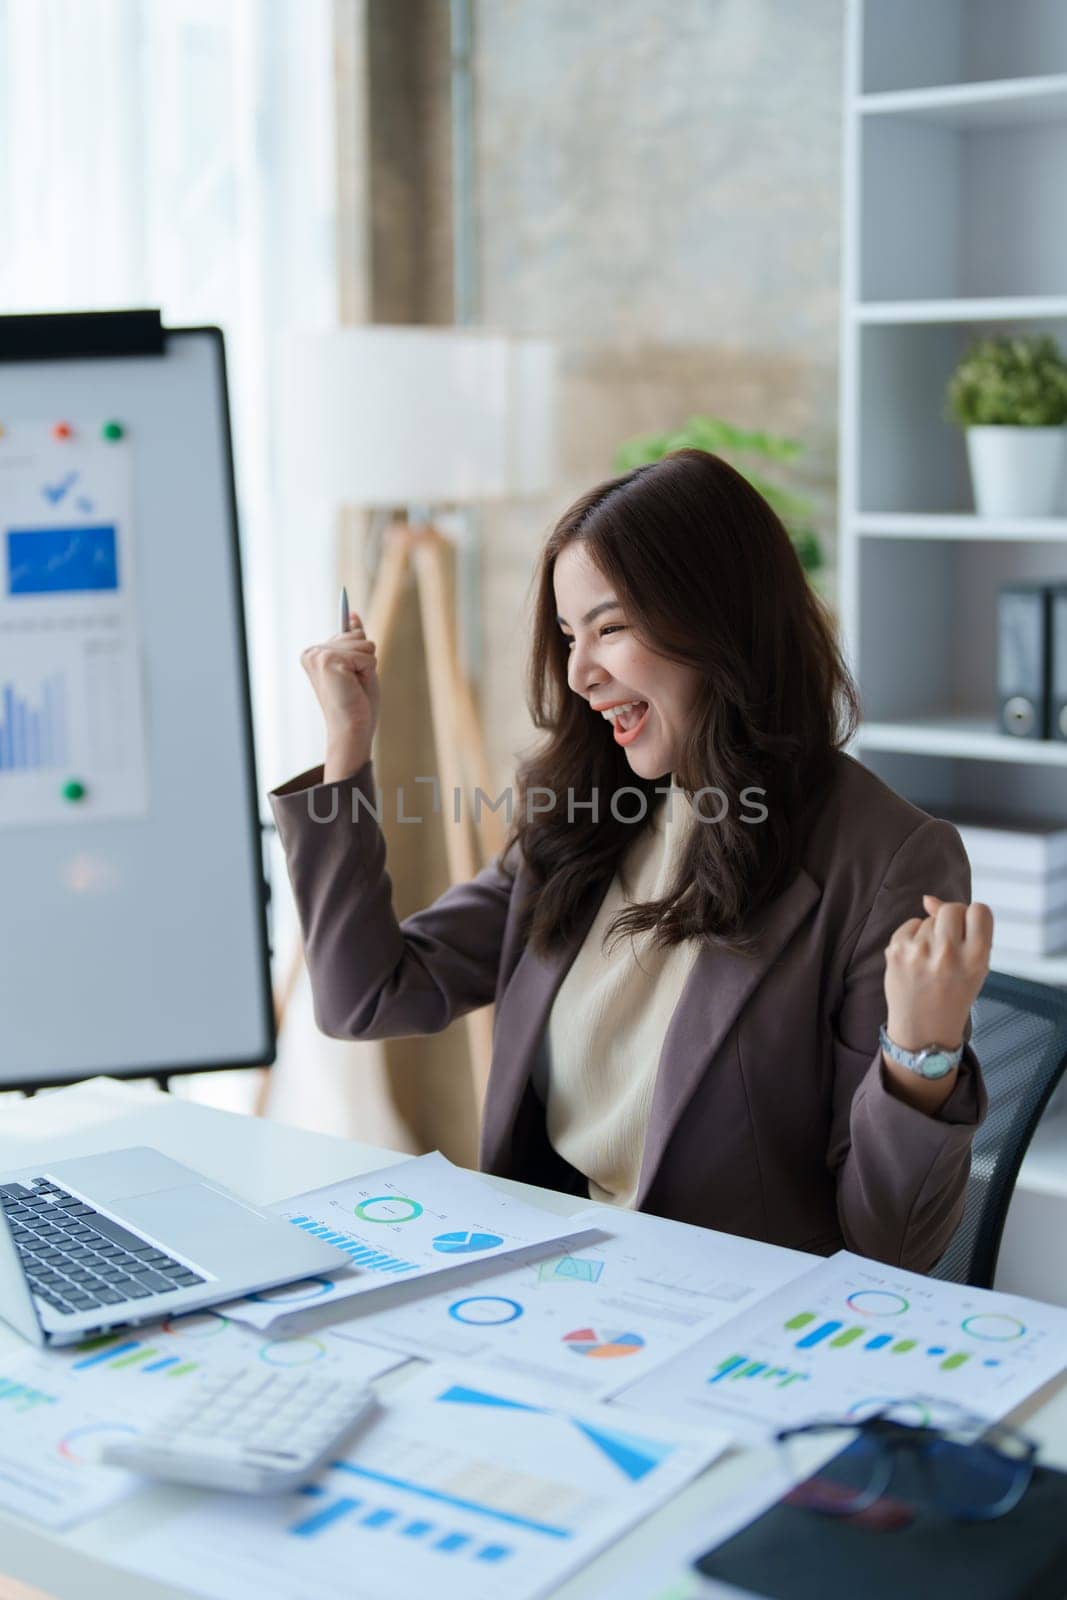 Beautiful young teen asian businesswomen using computer laptop with hands up in winner is gesture, Happy to be successful celebrating achievement success.